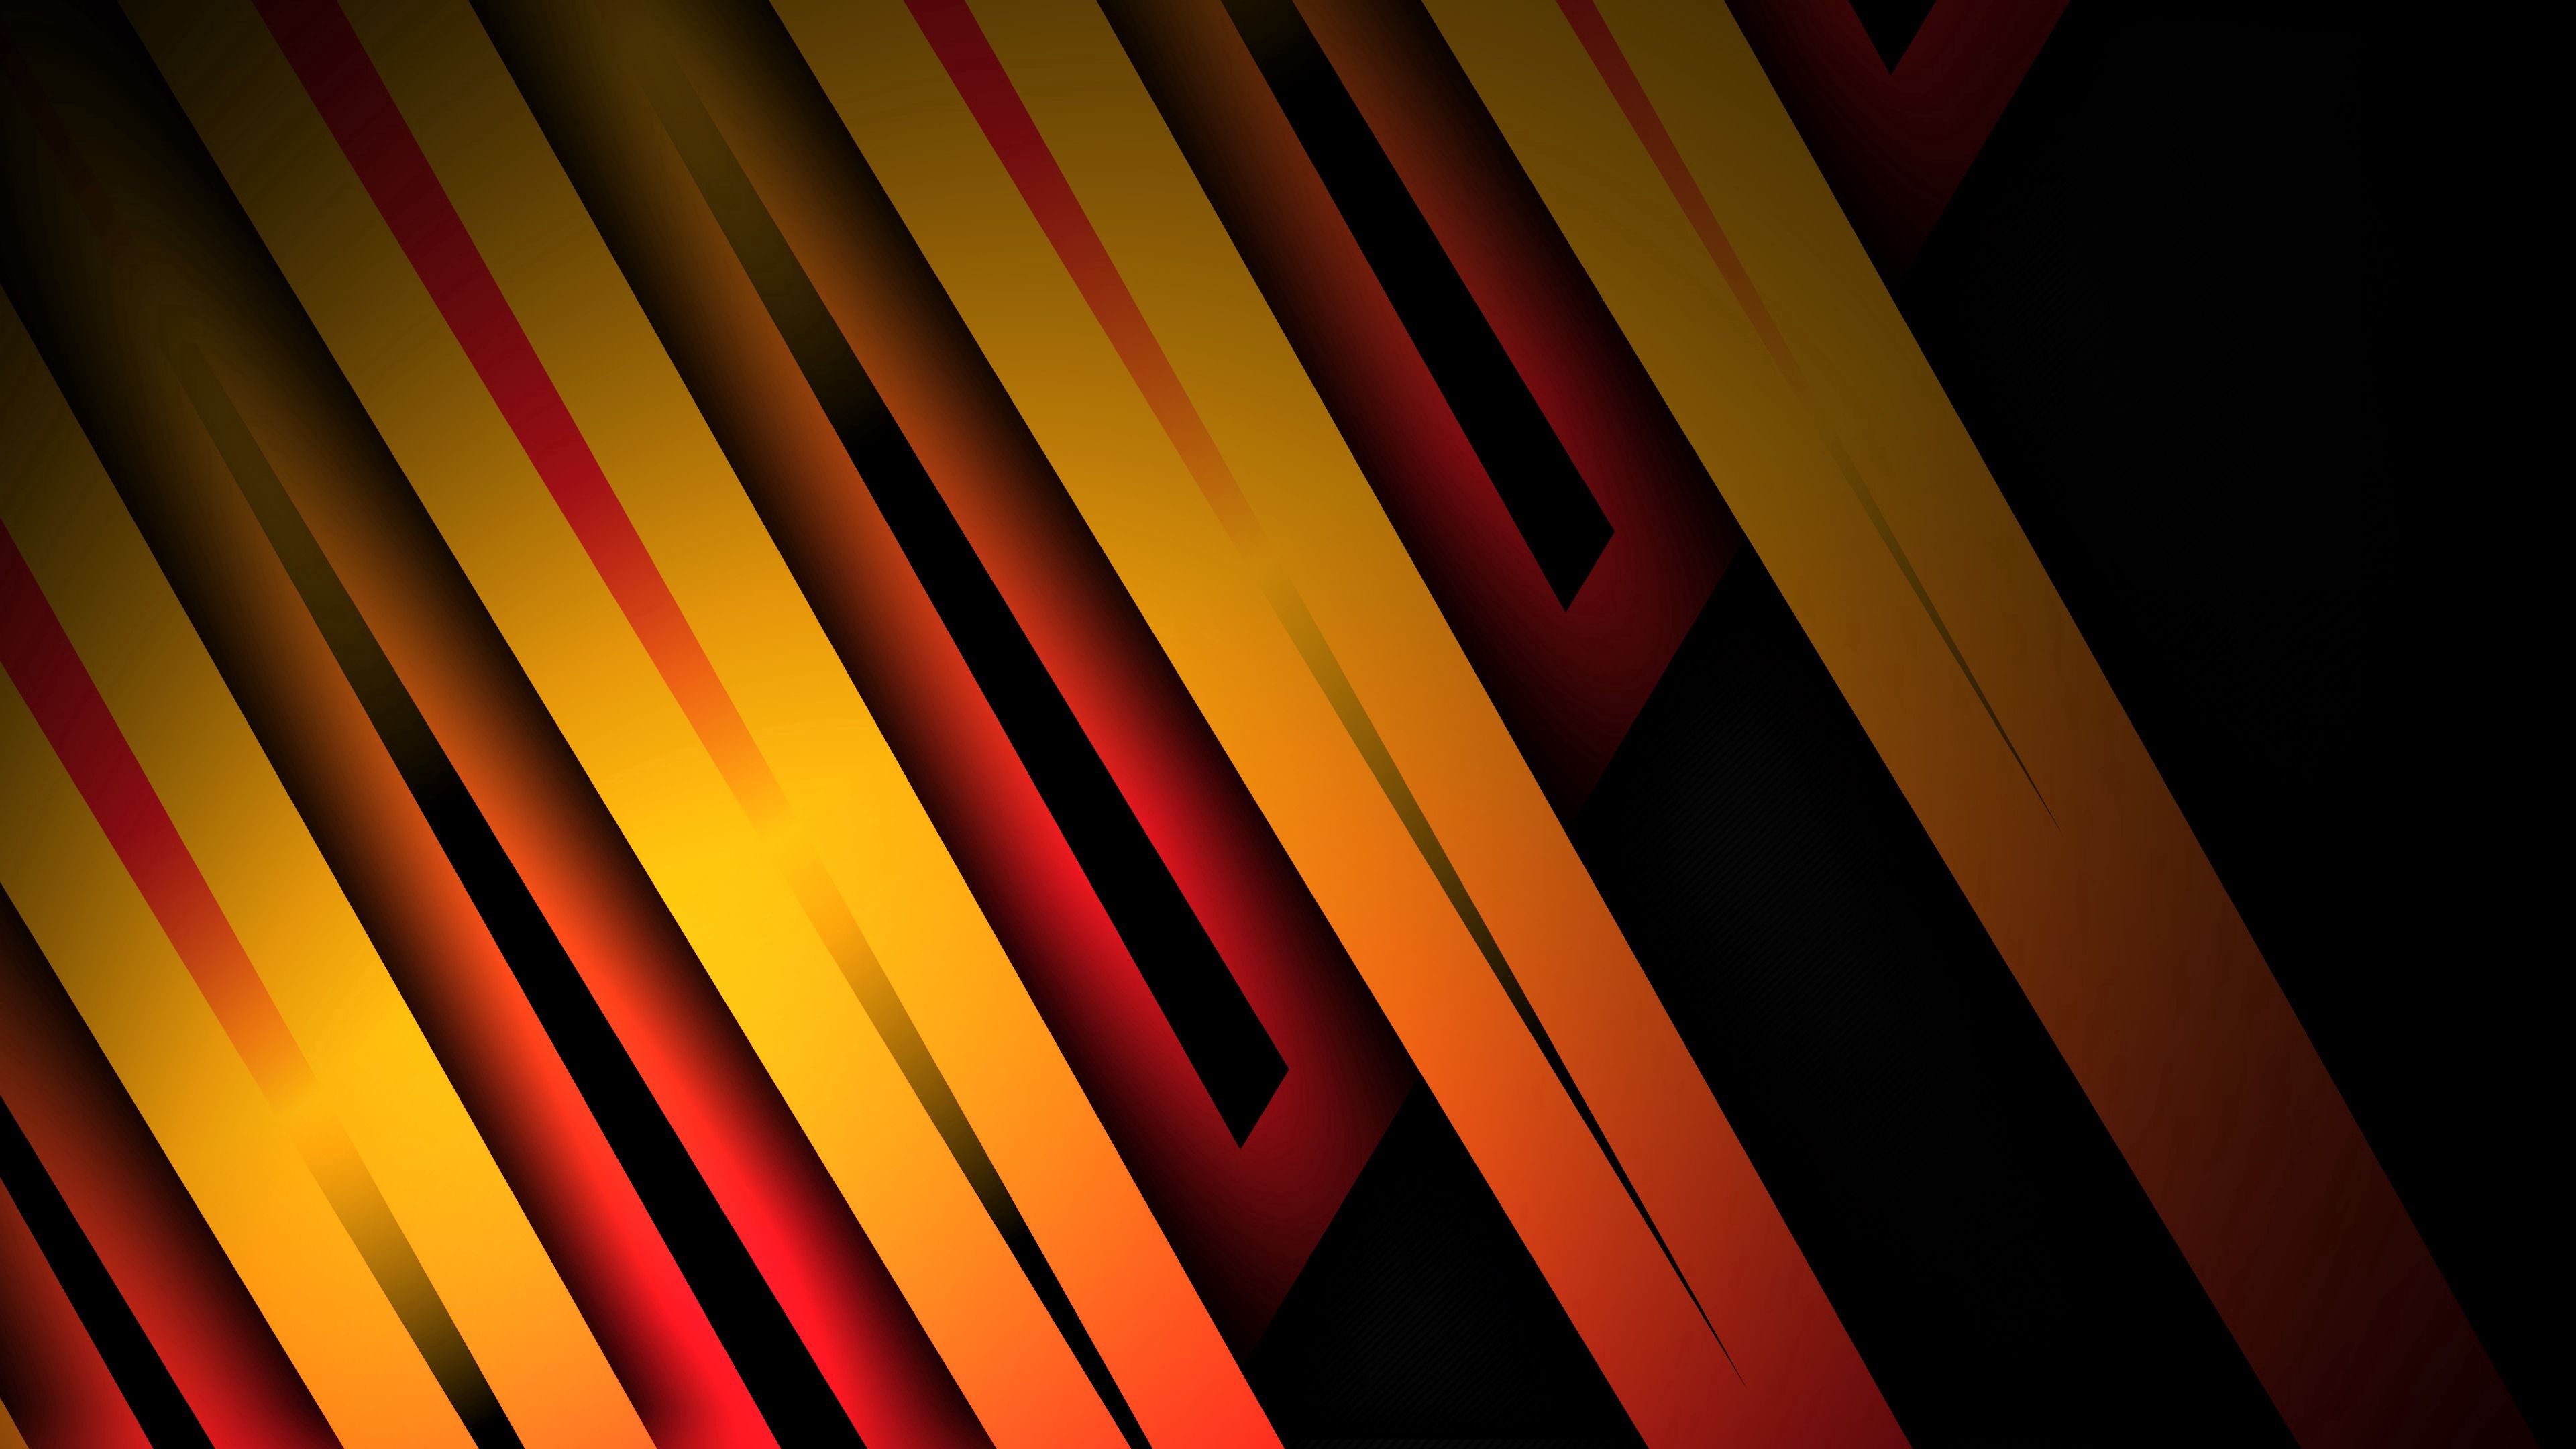 streaks, obliquely, abstract, dark, lines, stripes cell phone wallpapers